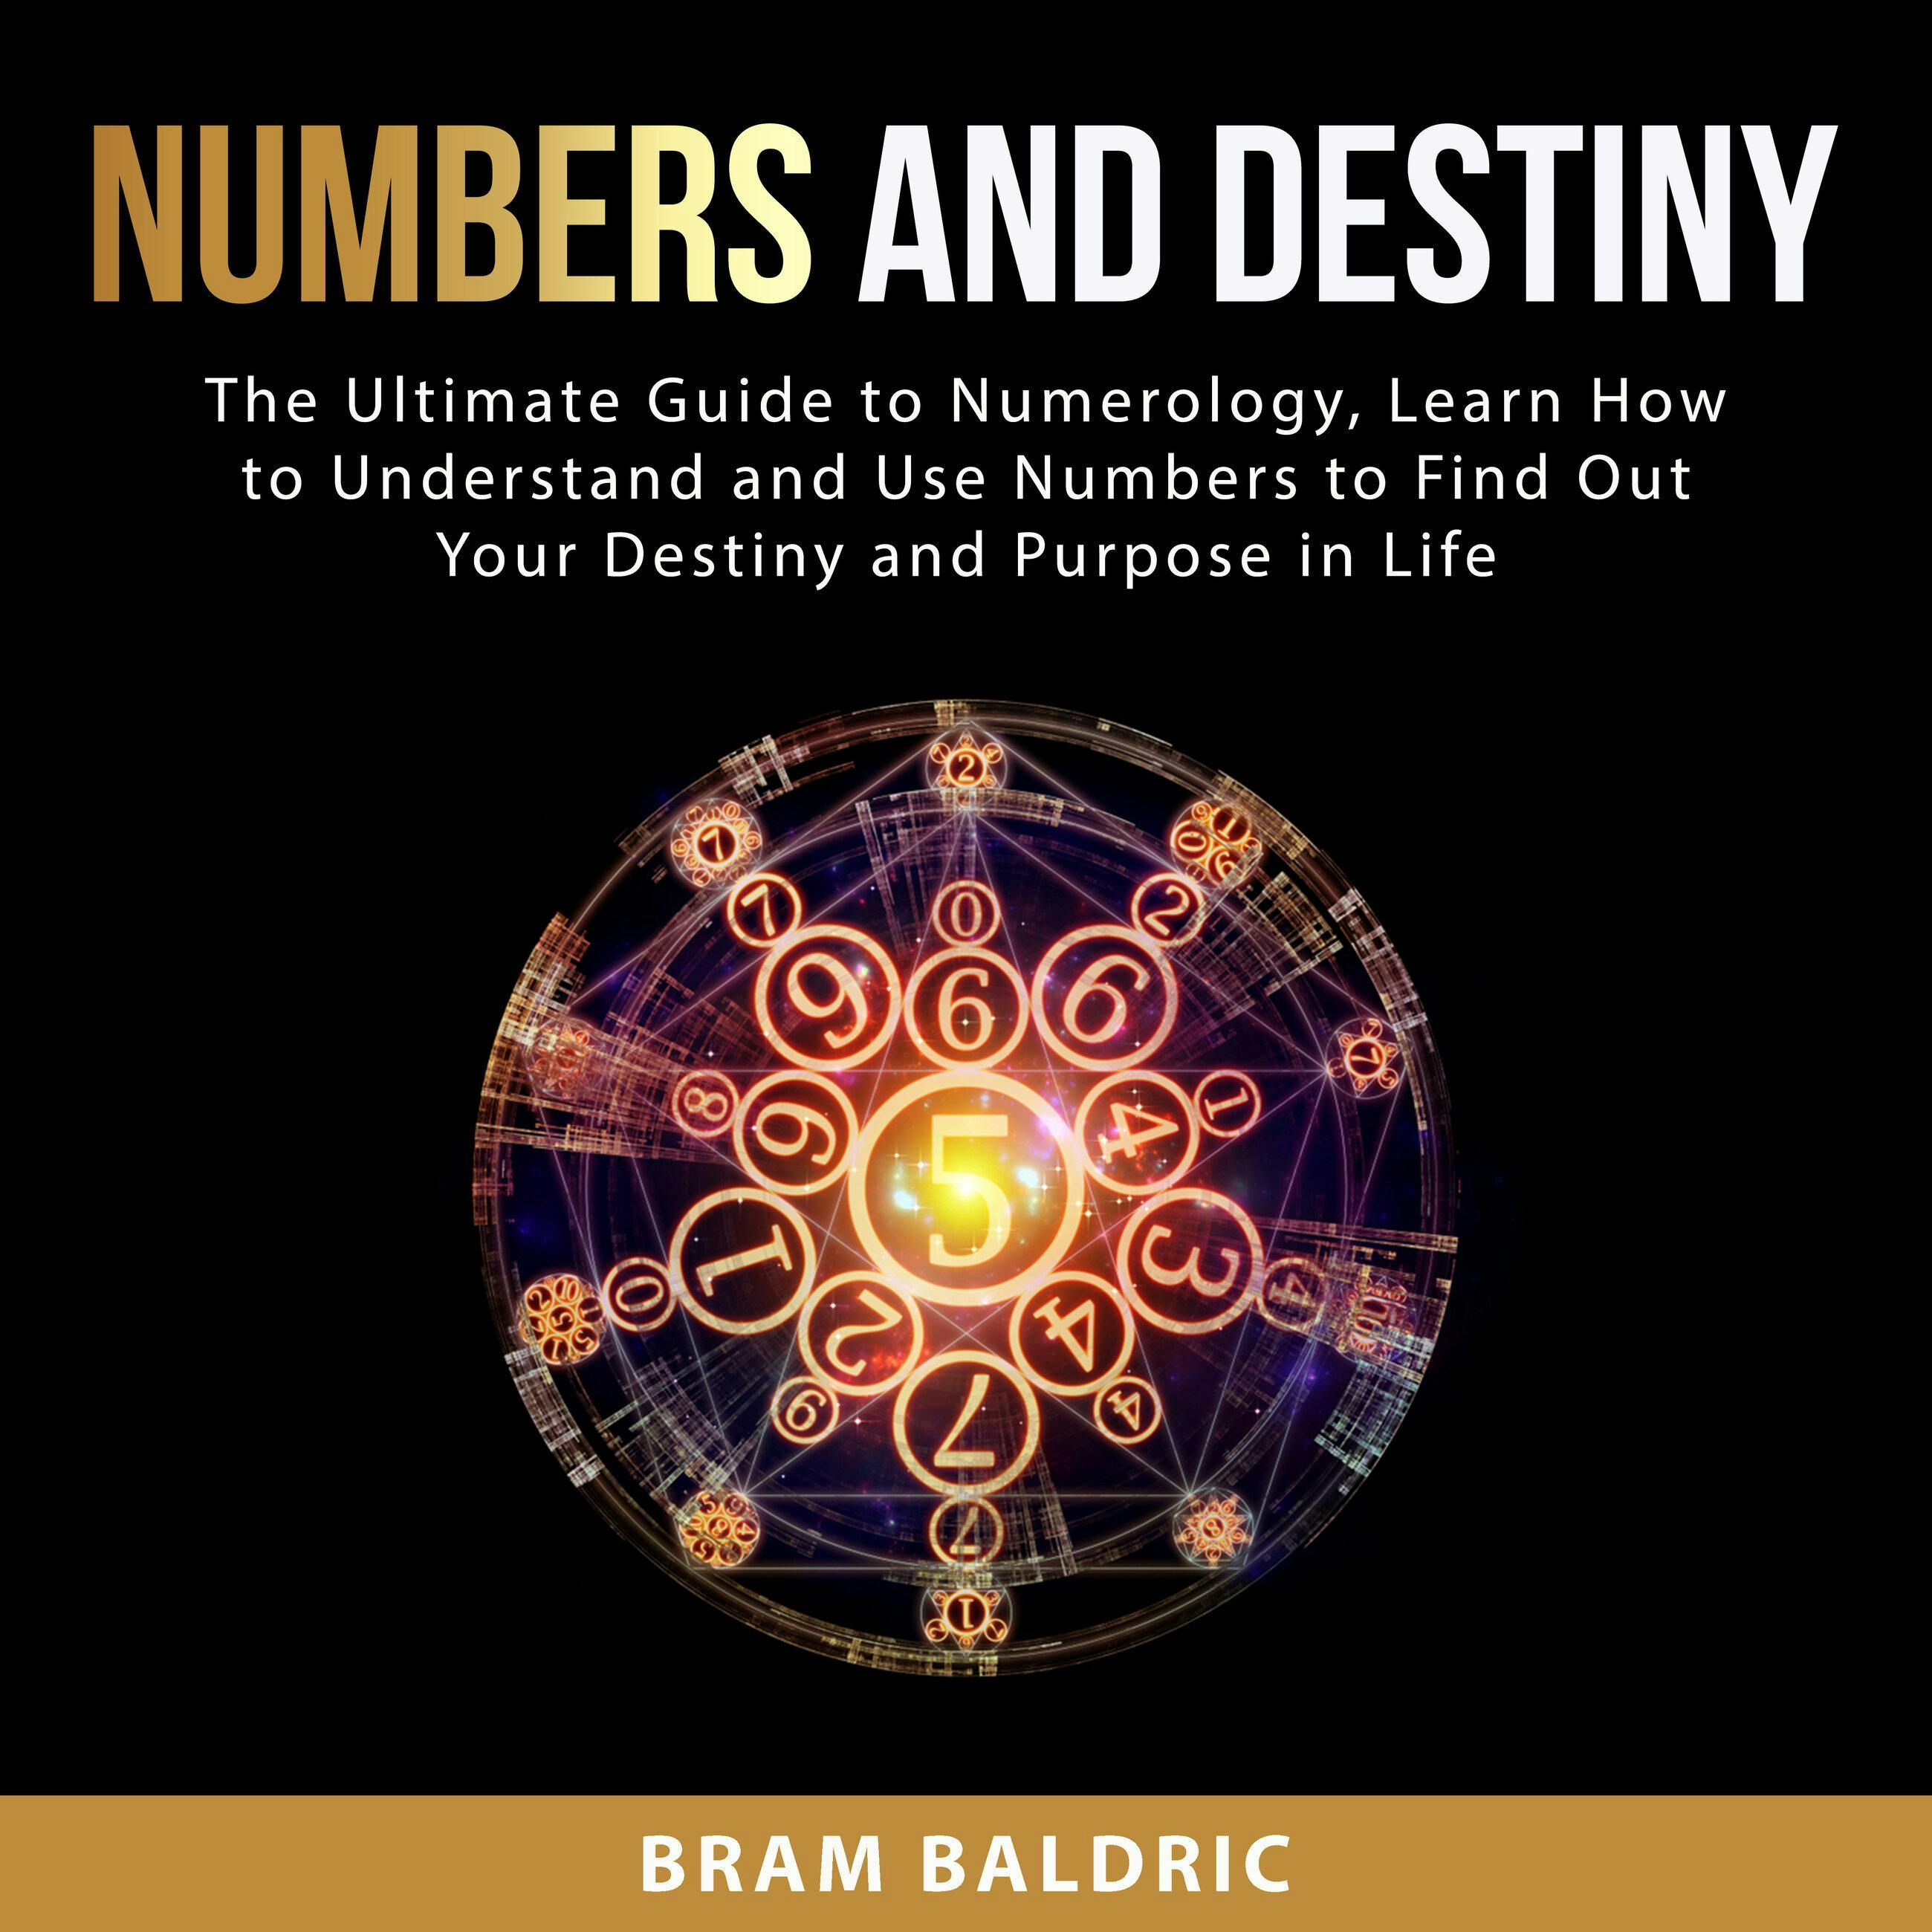 Numbers and Destiny: The Ultimate Guide to Numerology, Learn How to Understand and Use Numbers to Find Out Your Destiny and Purpose in Life - Bram Baldric